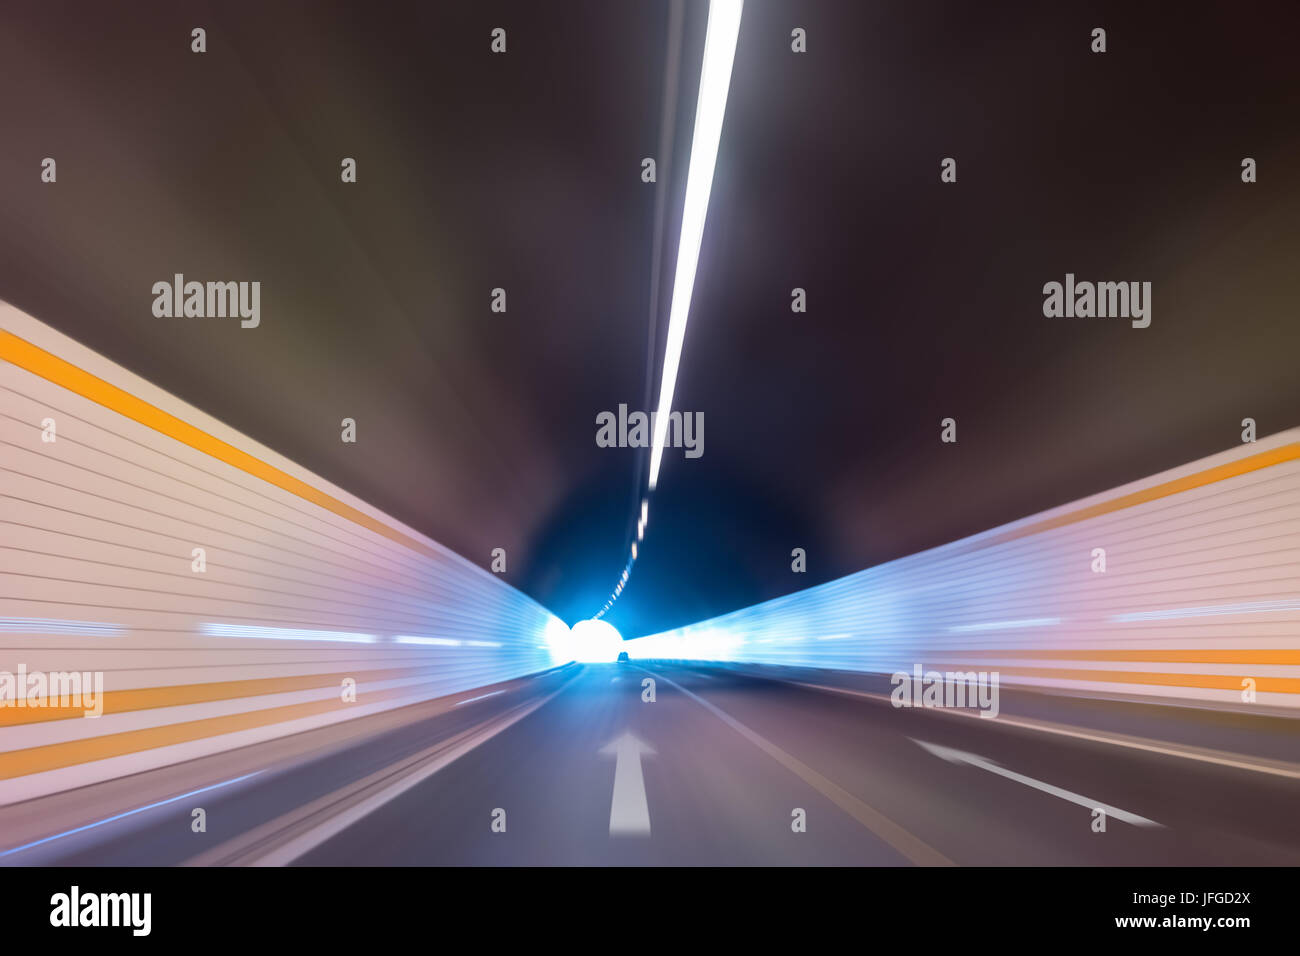 highway tunnel with car driving motion blur Stock Photo